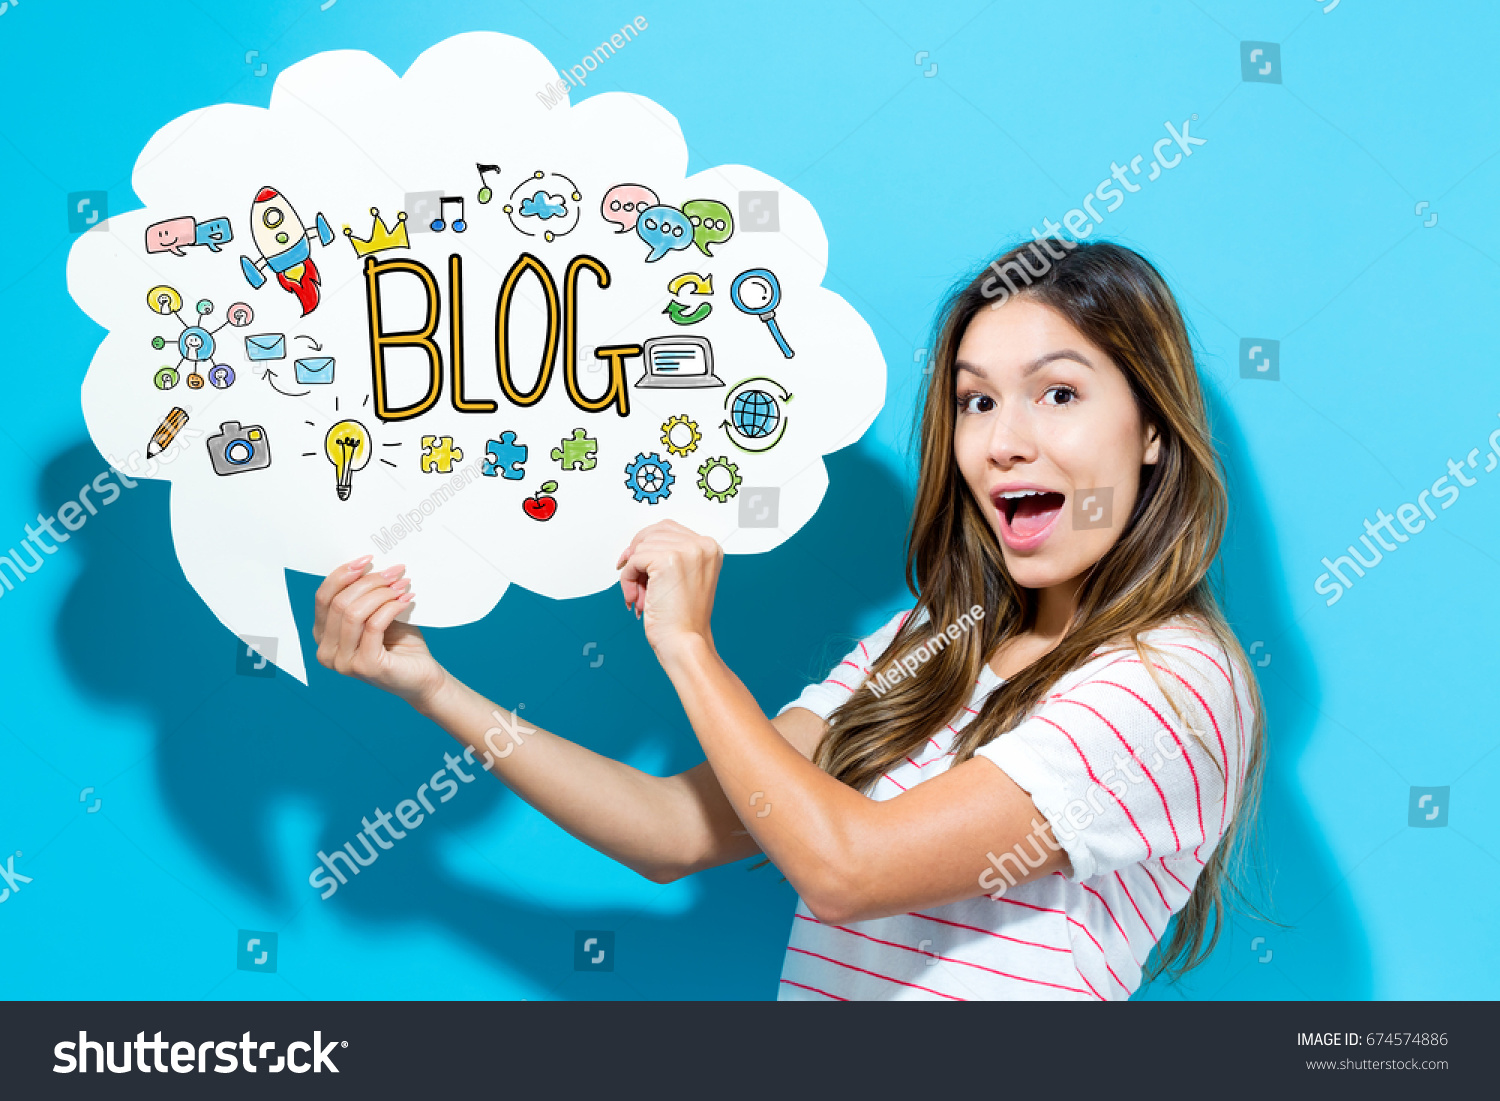 Blog text with young woman holding a speech bubble on a blue background #674574886